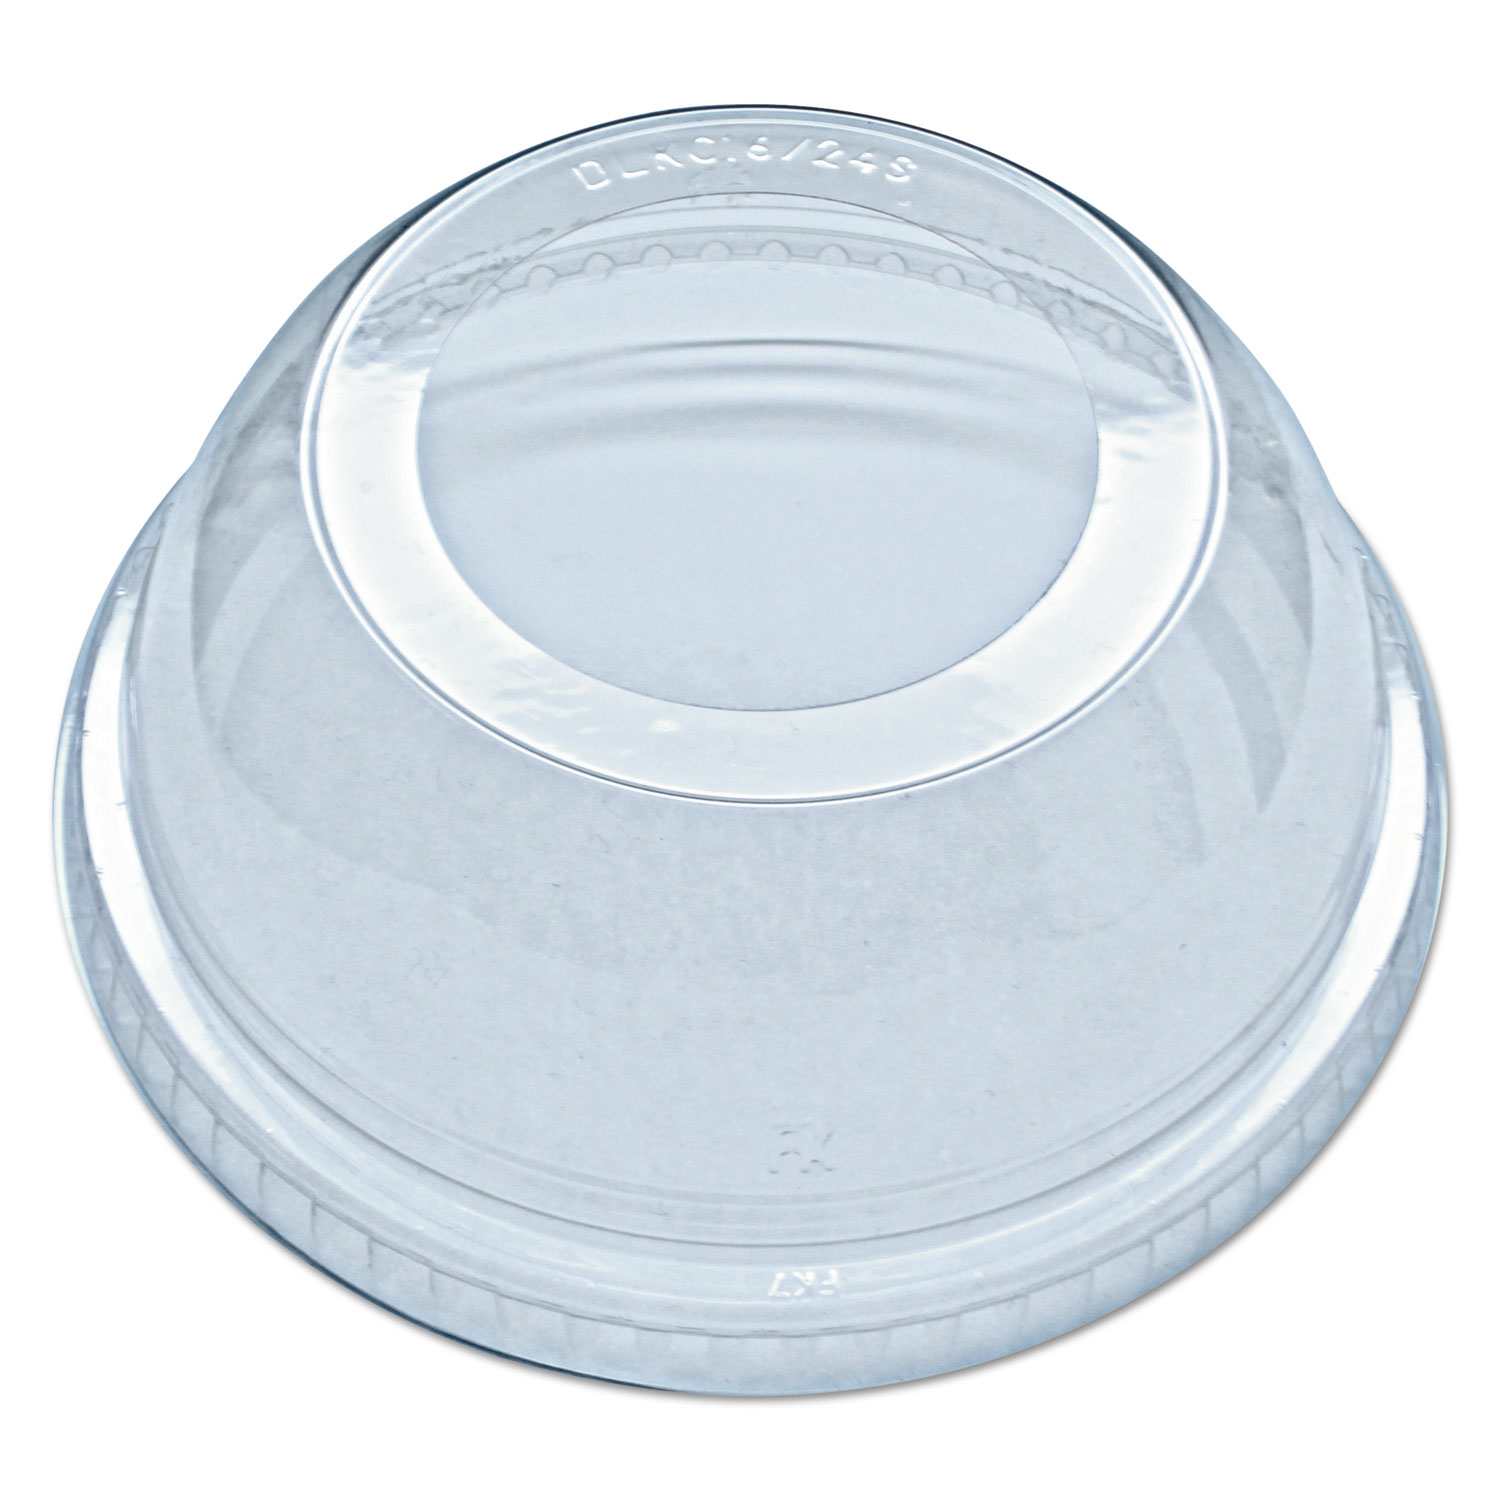 Kal-Clear/Nexclear Drink Cup Lids, F/5-24 oz Cups, Clear, 1000/Carton